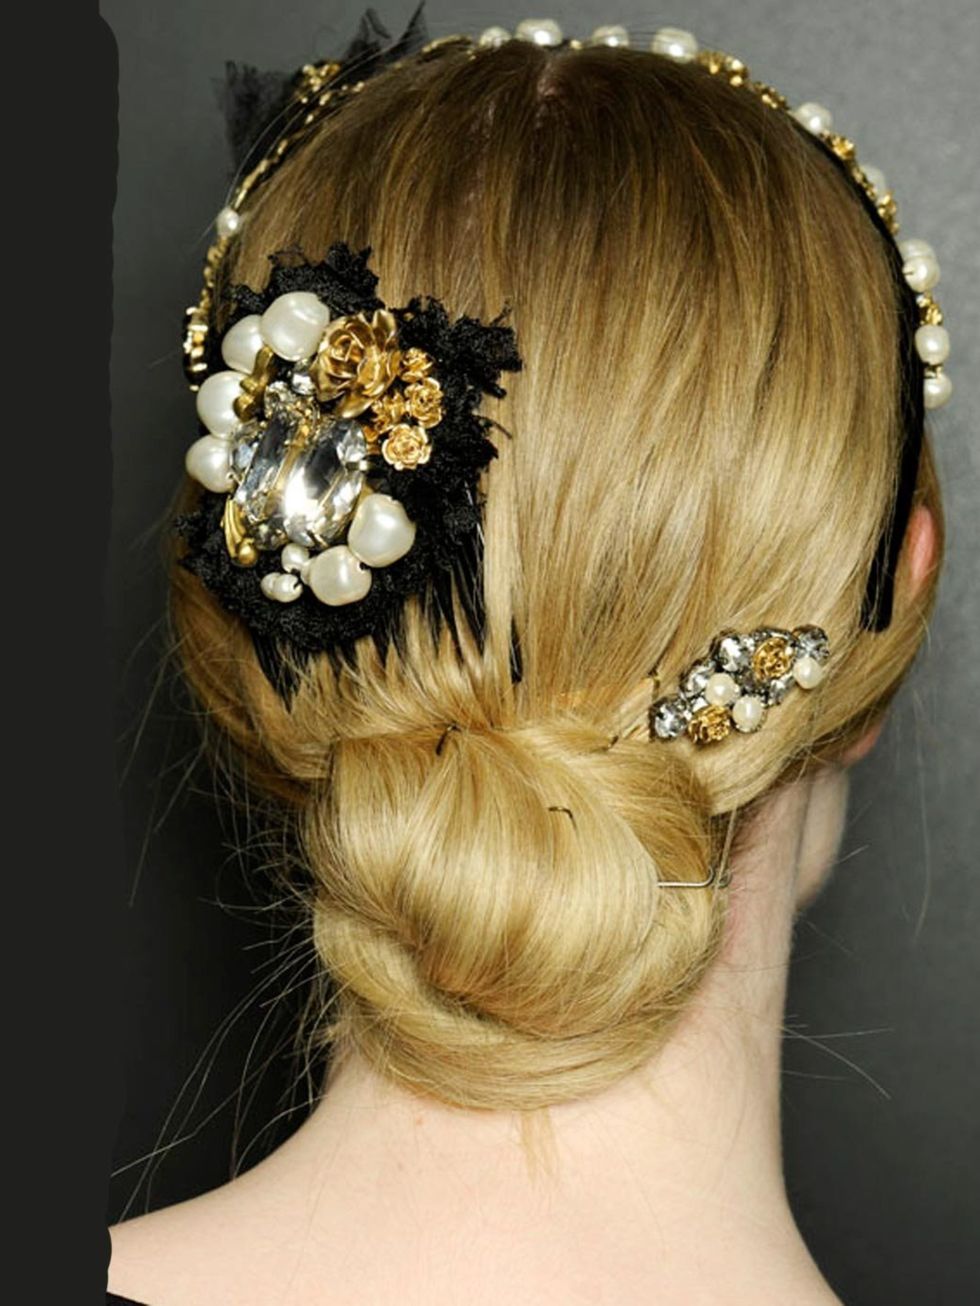 &lt;p&gt;&lt;strong&gt;ELLE&#039;s Verdict: &lt;/strong&gt;Bejewelled hair accessories are a great way to jazz up a plain bun. &lt;/p&gt;&lt;p&gt;&lt;strong&gt;How: &lt;/strong&gt;Layer up as many as you like...&lt;/p&gt;&lt;p&gt;&lt;strong&gt;Pair with: 